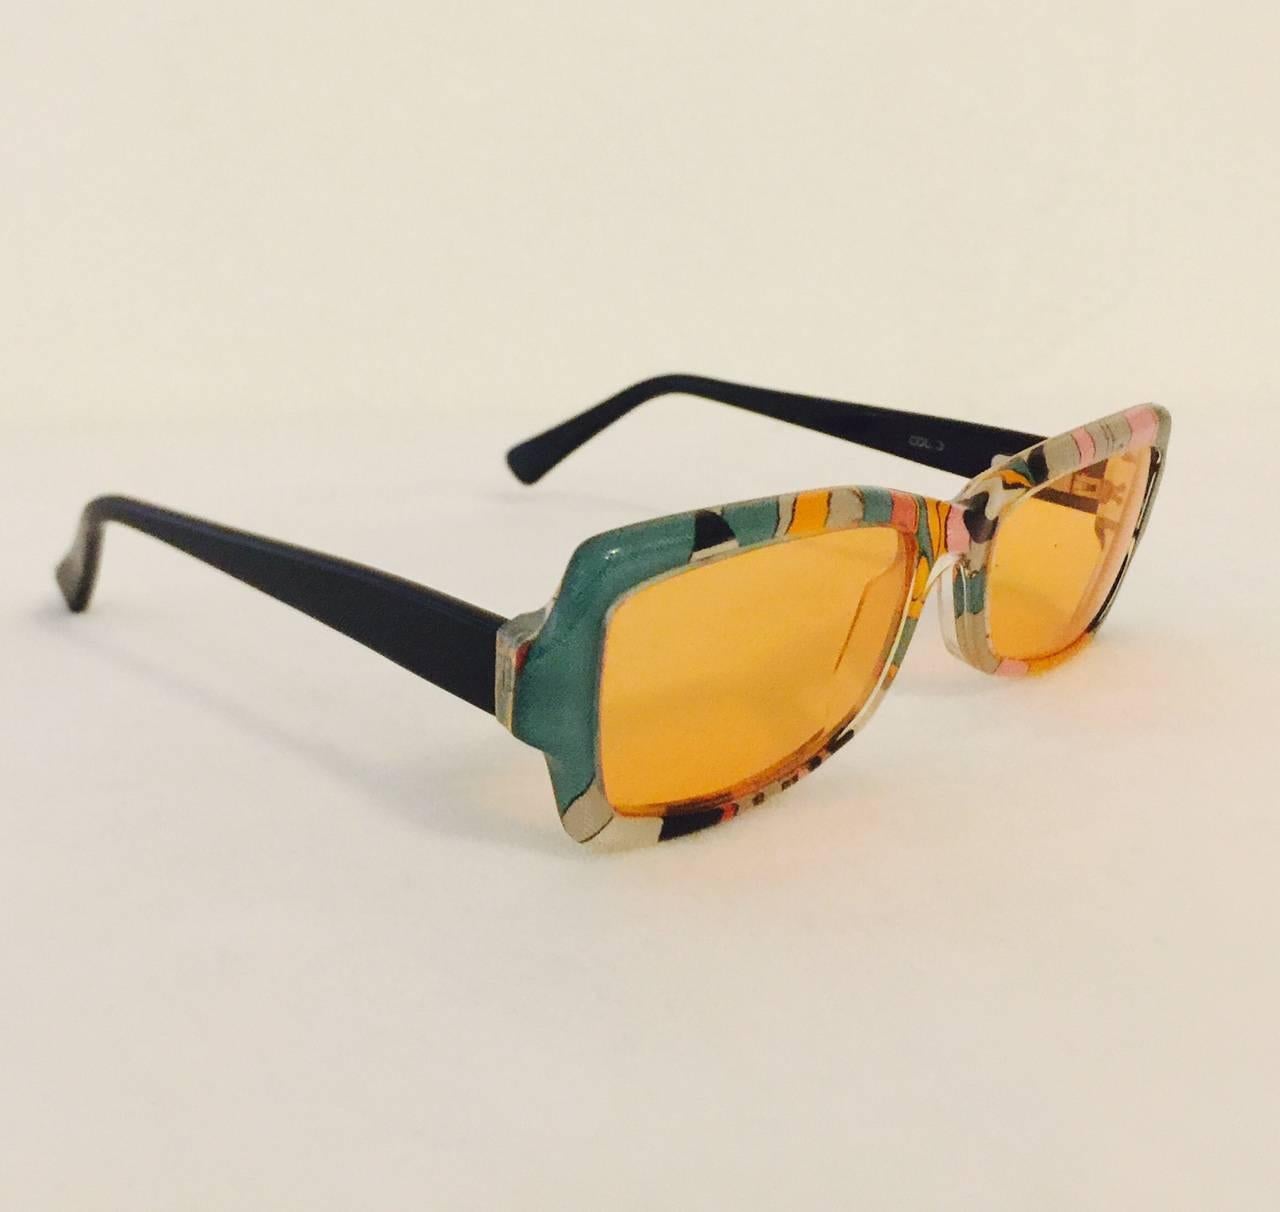 Palm Beach, Positano or Pucci? This vintage pair of iconic green, pink and orange signature print sunglasses by Emilio Pucci are a must for any 